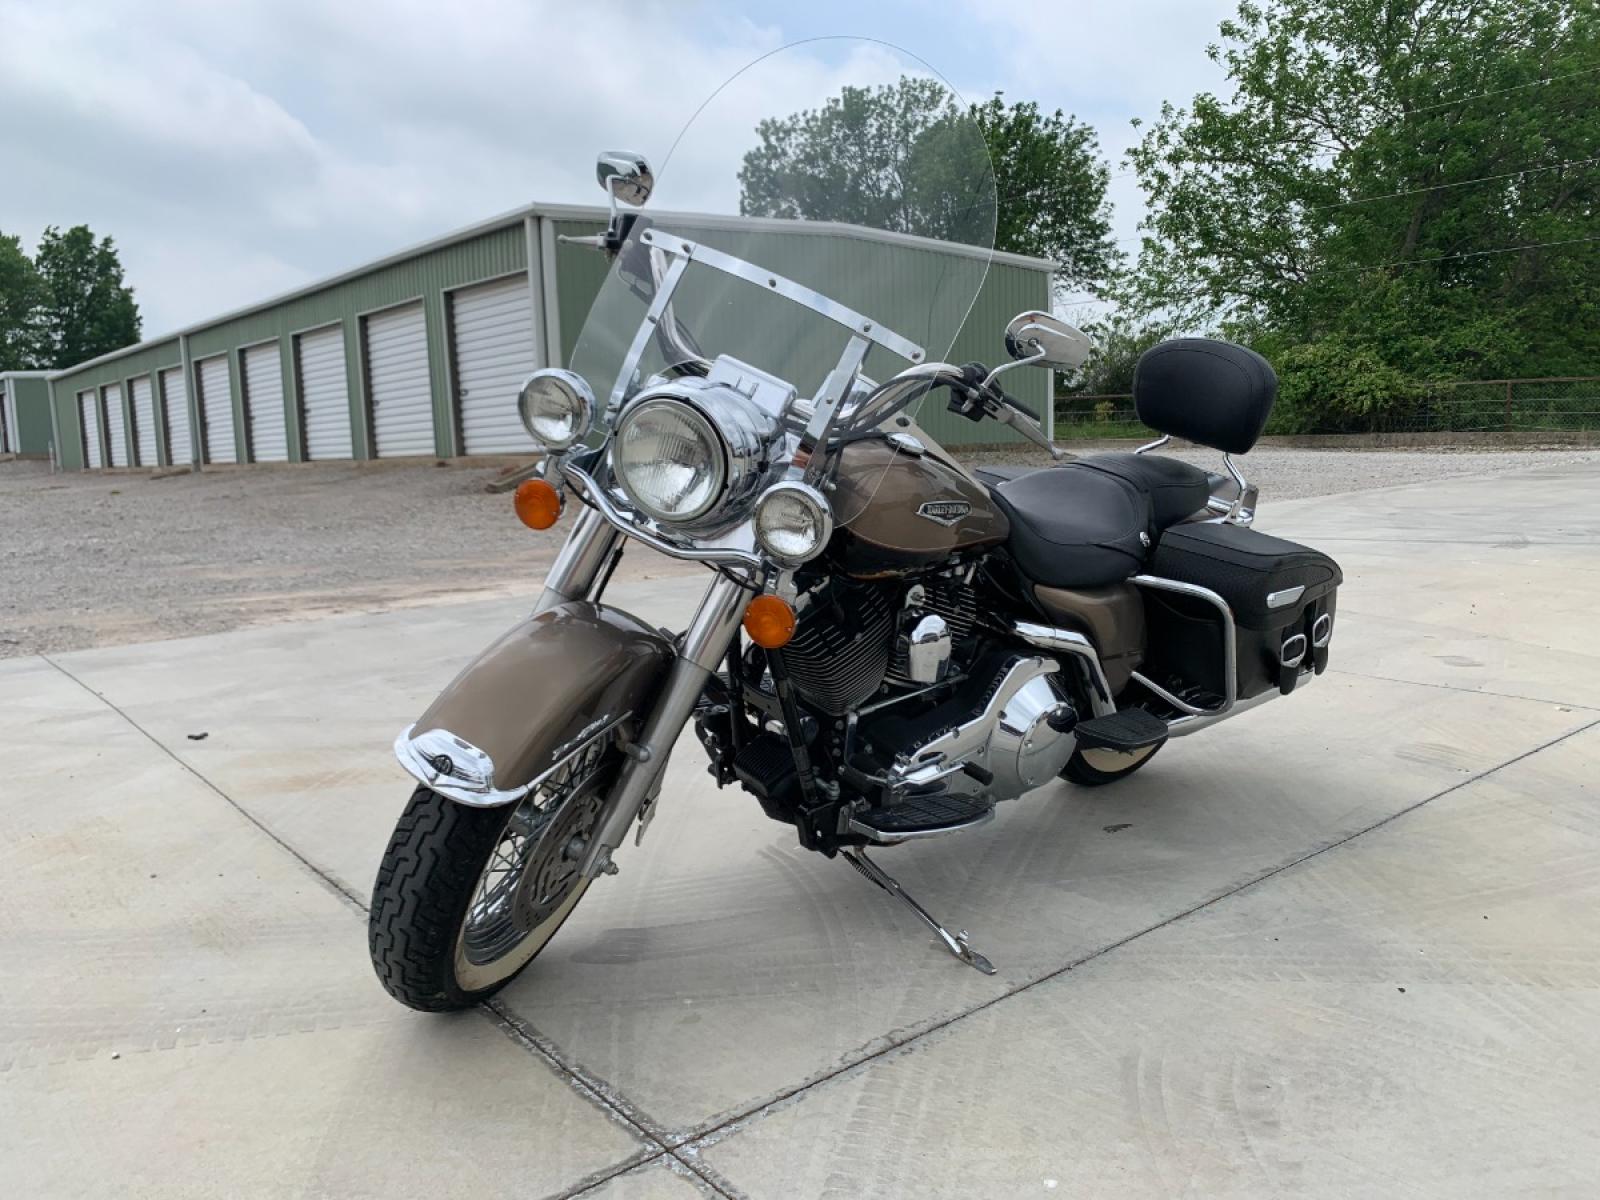 2004 GOLD Harley-Davidson FLHRCI ROAD KING (1HD1FRW104Y) with an 1450CC engine, 5 SPEED MANUAL transmission, located at 17760 HWY 62, MORRIS, 74445, 35.609104, -95.877060 - 2004 HARLEY DAVIDSON FLHRCI ROAD KING IS READY TO CRUISE THE HIGHWAYS. IT HAS A V2 FOUR-STROKE MOTOR, 1450CC, FEATURES LEATHER SEATS, ELECTRIC START, CRUISE CONTROL, 5-SPEED MANUAL, VANCE AND HINES DUAL EXHAUST, AND LEATHER-COVERED COMPOSITE SADDLEBAGS. IT APPEARS TO BE GARAGE KEPT. REBUILT TITLE D - Photo #3